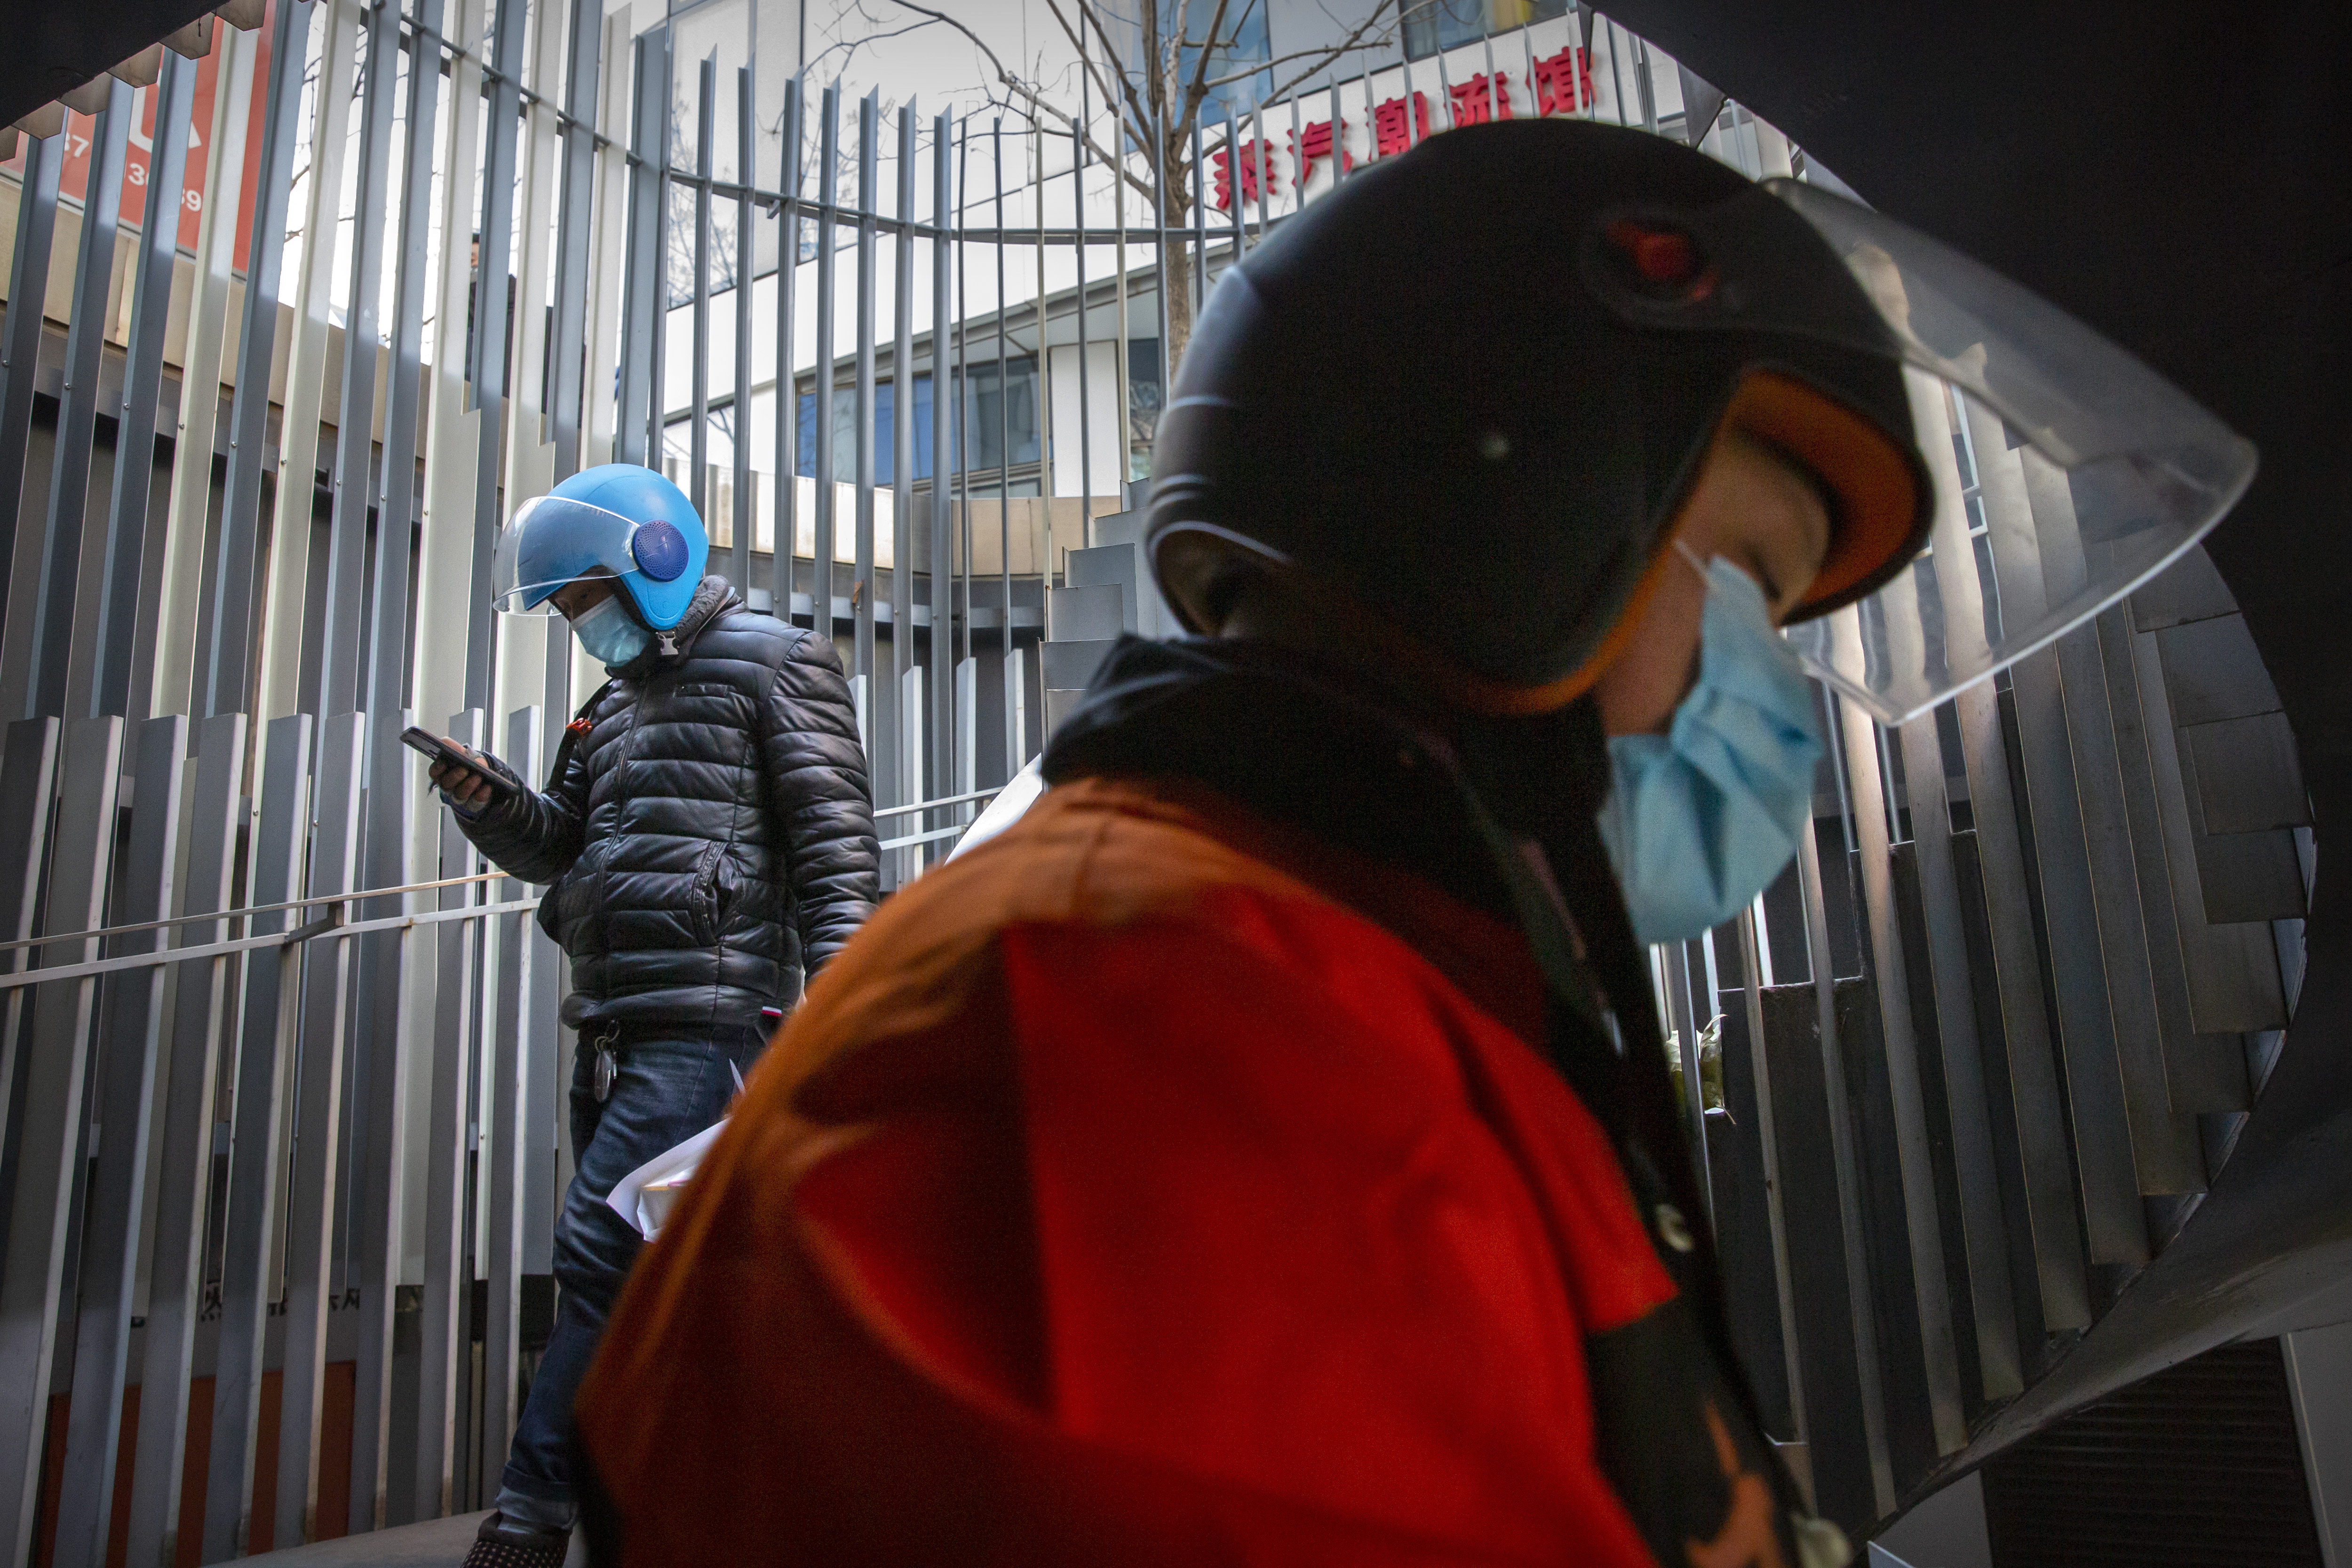 Delivery drivers wearing face masks to protect against the coronavirus walk along a staircase at an office and shopping complex in Beijing, Wednesday, Jan. 6, 2021. China's Hebei province is enforcing stricter control measures following a further rise in coronavirus cases in the province, which is adjacent to the capital Beijing and is due to host events for next year's Winter Olympics. (AP Photo/Mark Schiefelbein)